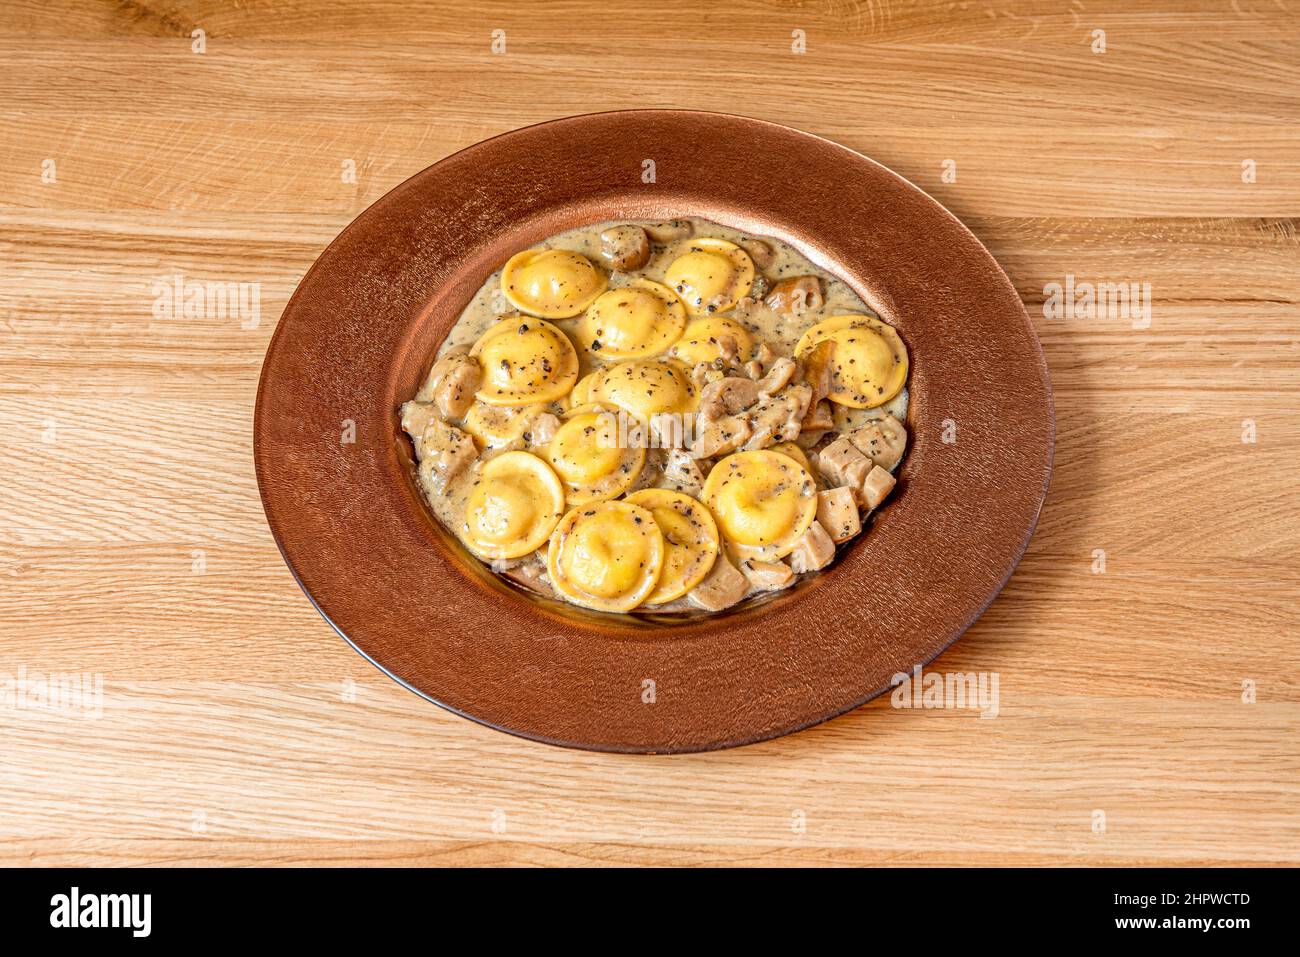 The fresh pasta is made with superior quality durum wheat semolina, spinach and egg, stuffed with mushrooms, mushrooms, cheese and breadcrumbs Stock Photo